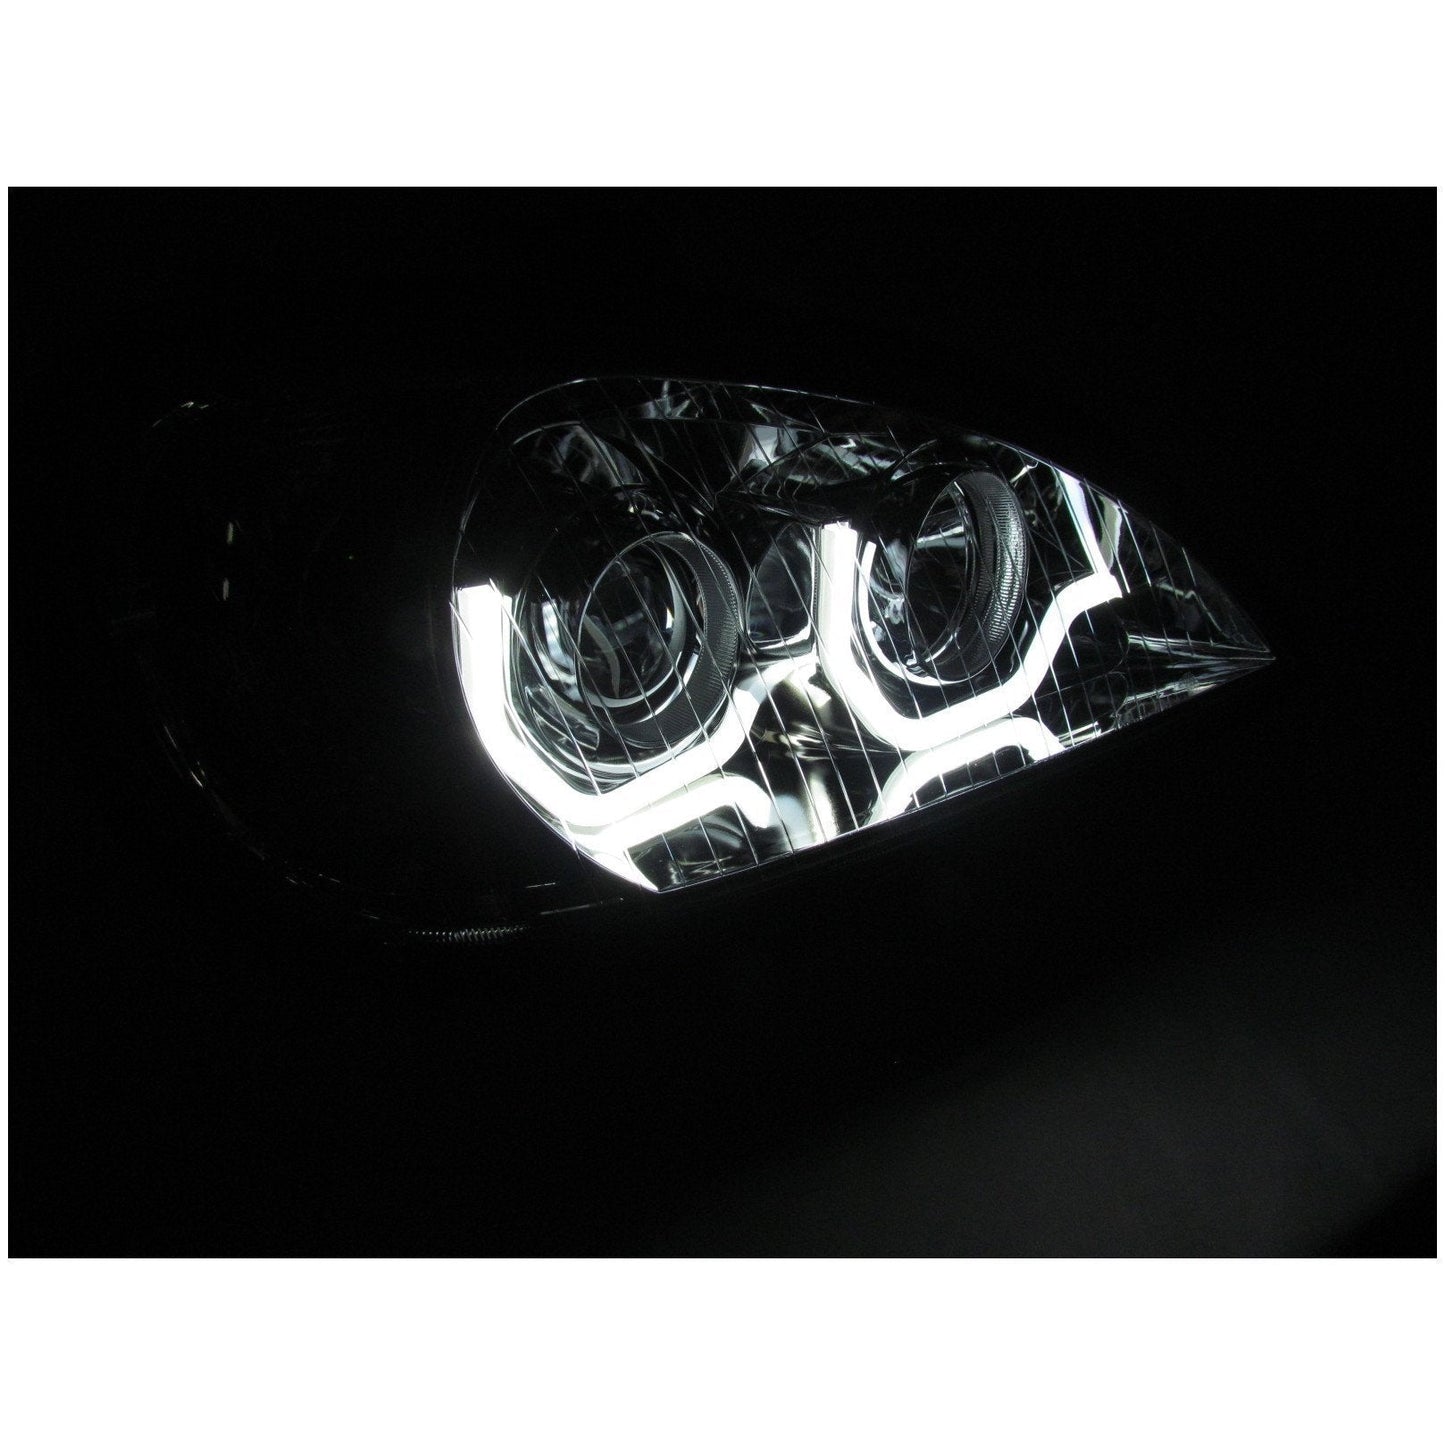 Fortpro Chrome Housing Projector Headlight with LED Light Bar For Freightliner Columbia - Driver Side | F236801